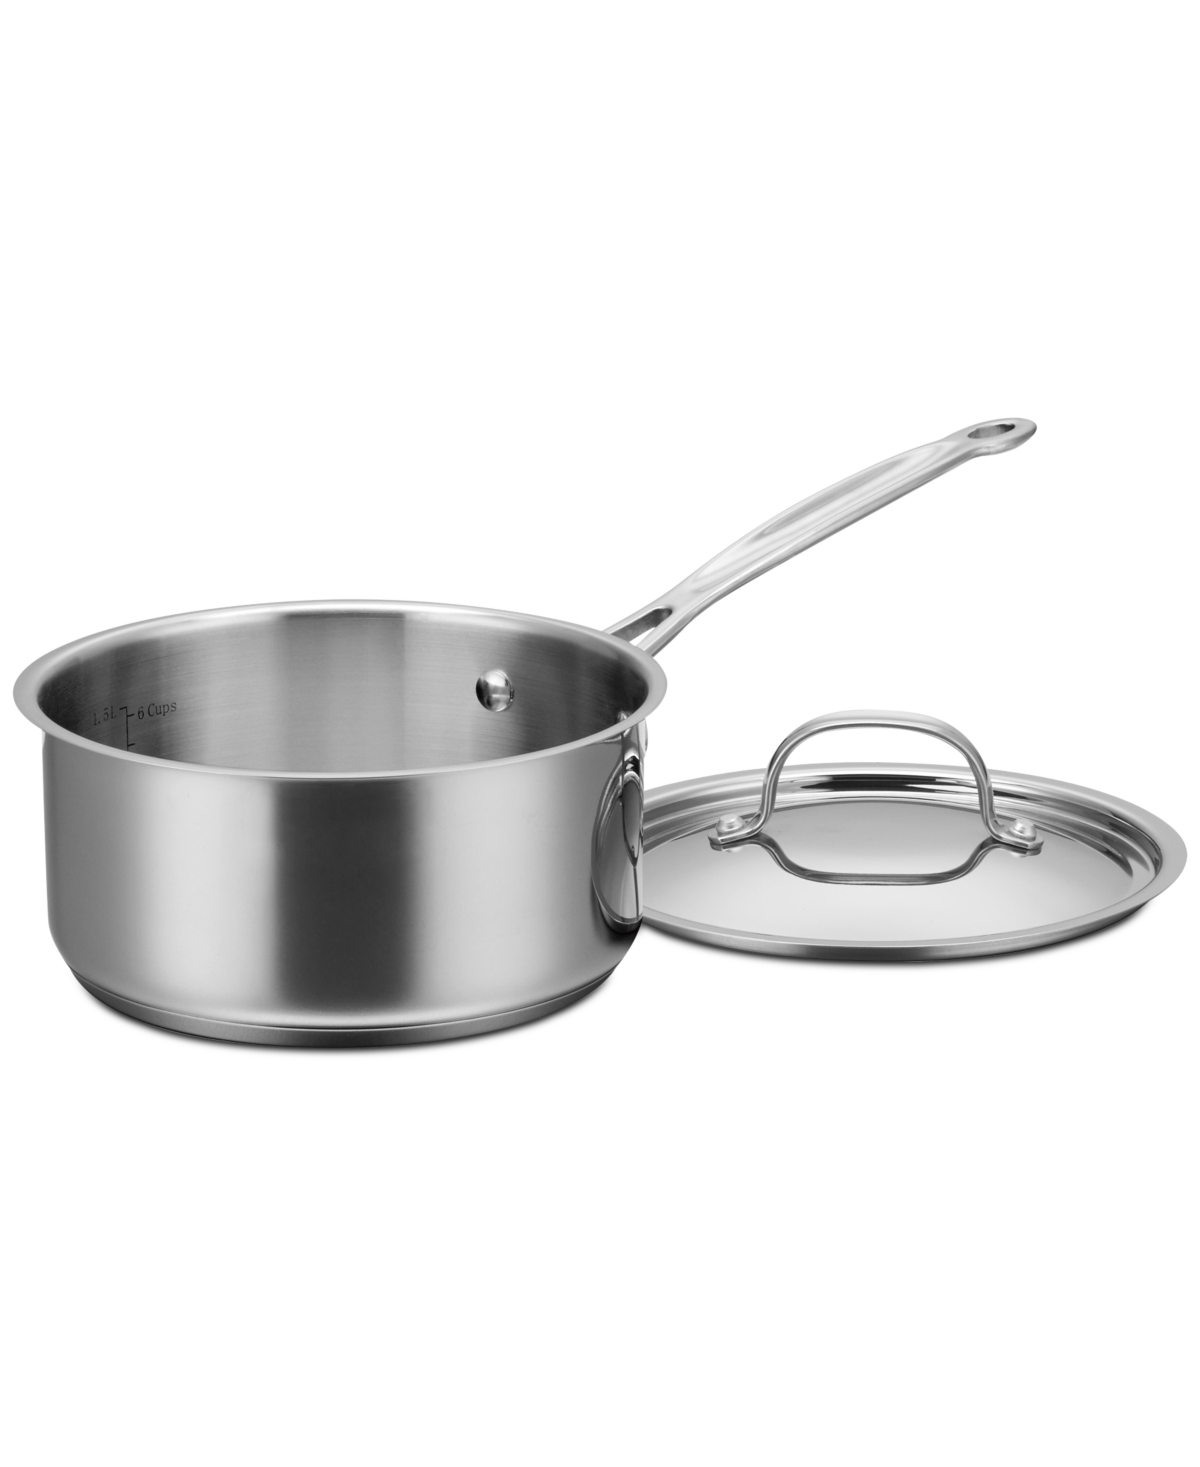 Cuisinart Chef's Classic Stainless Steel 2-qt. Pour Saucepan With Lid In Metallic